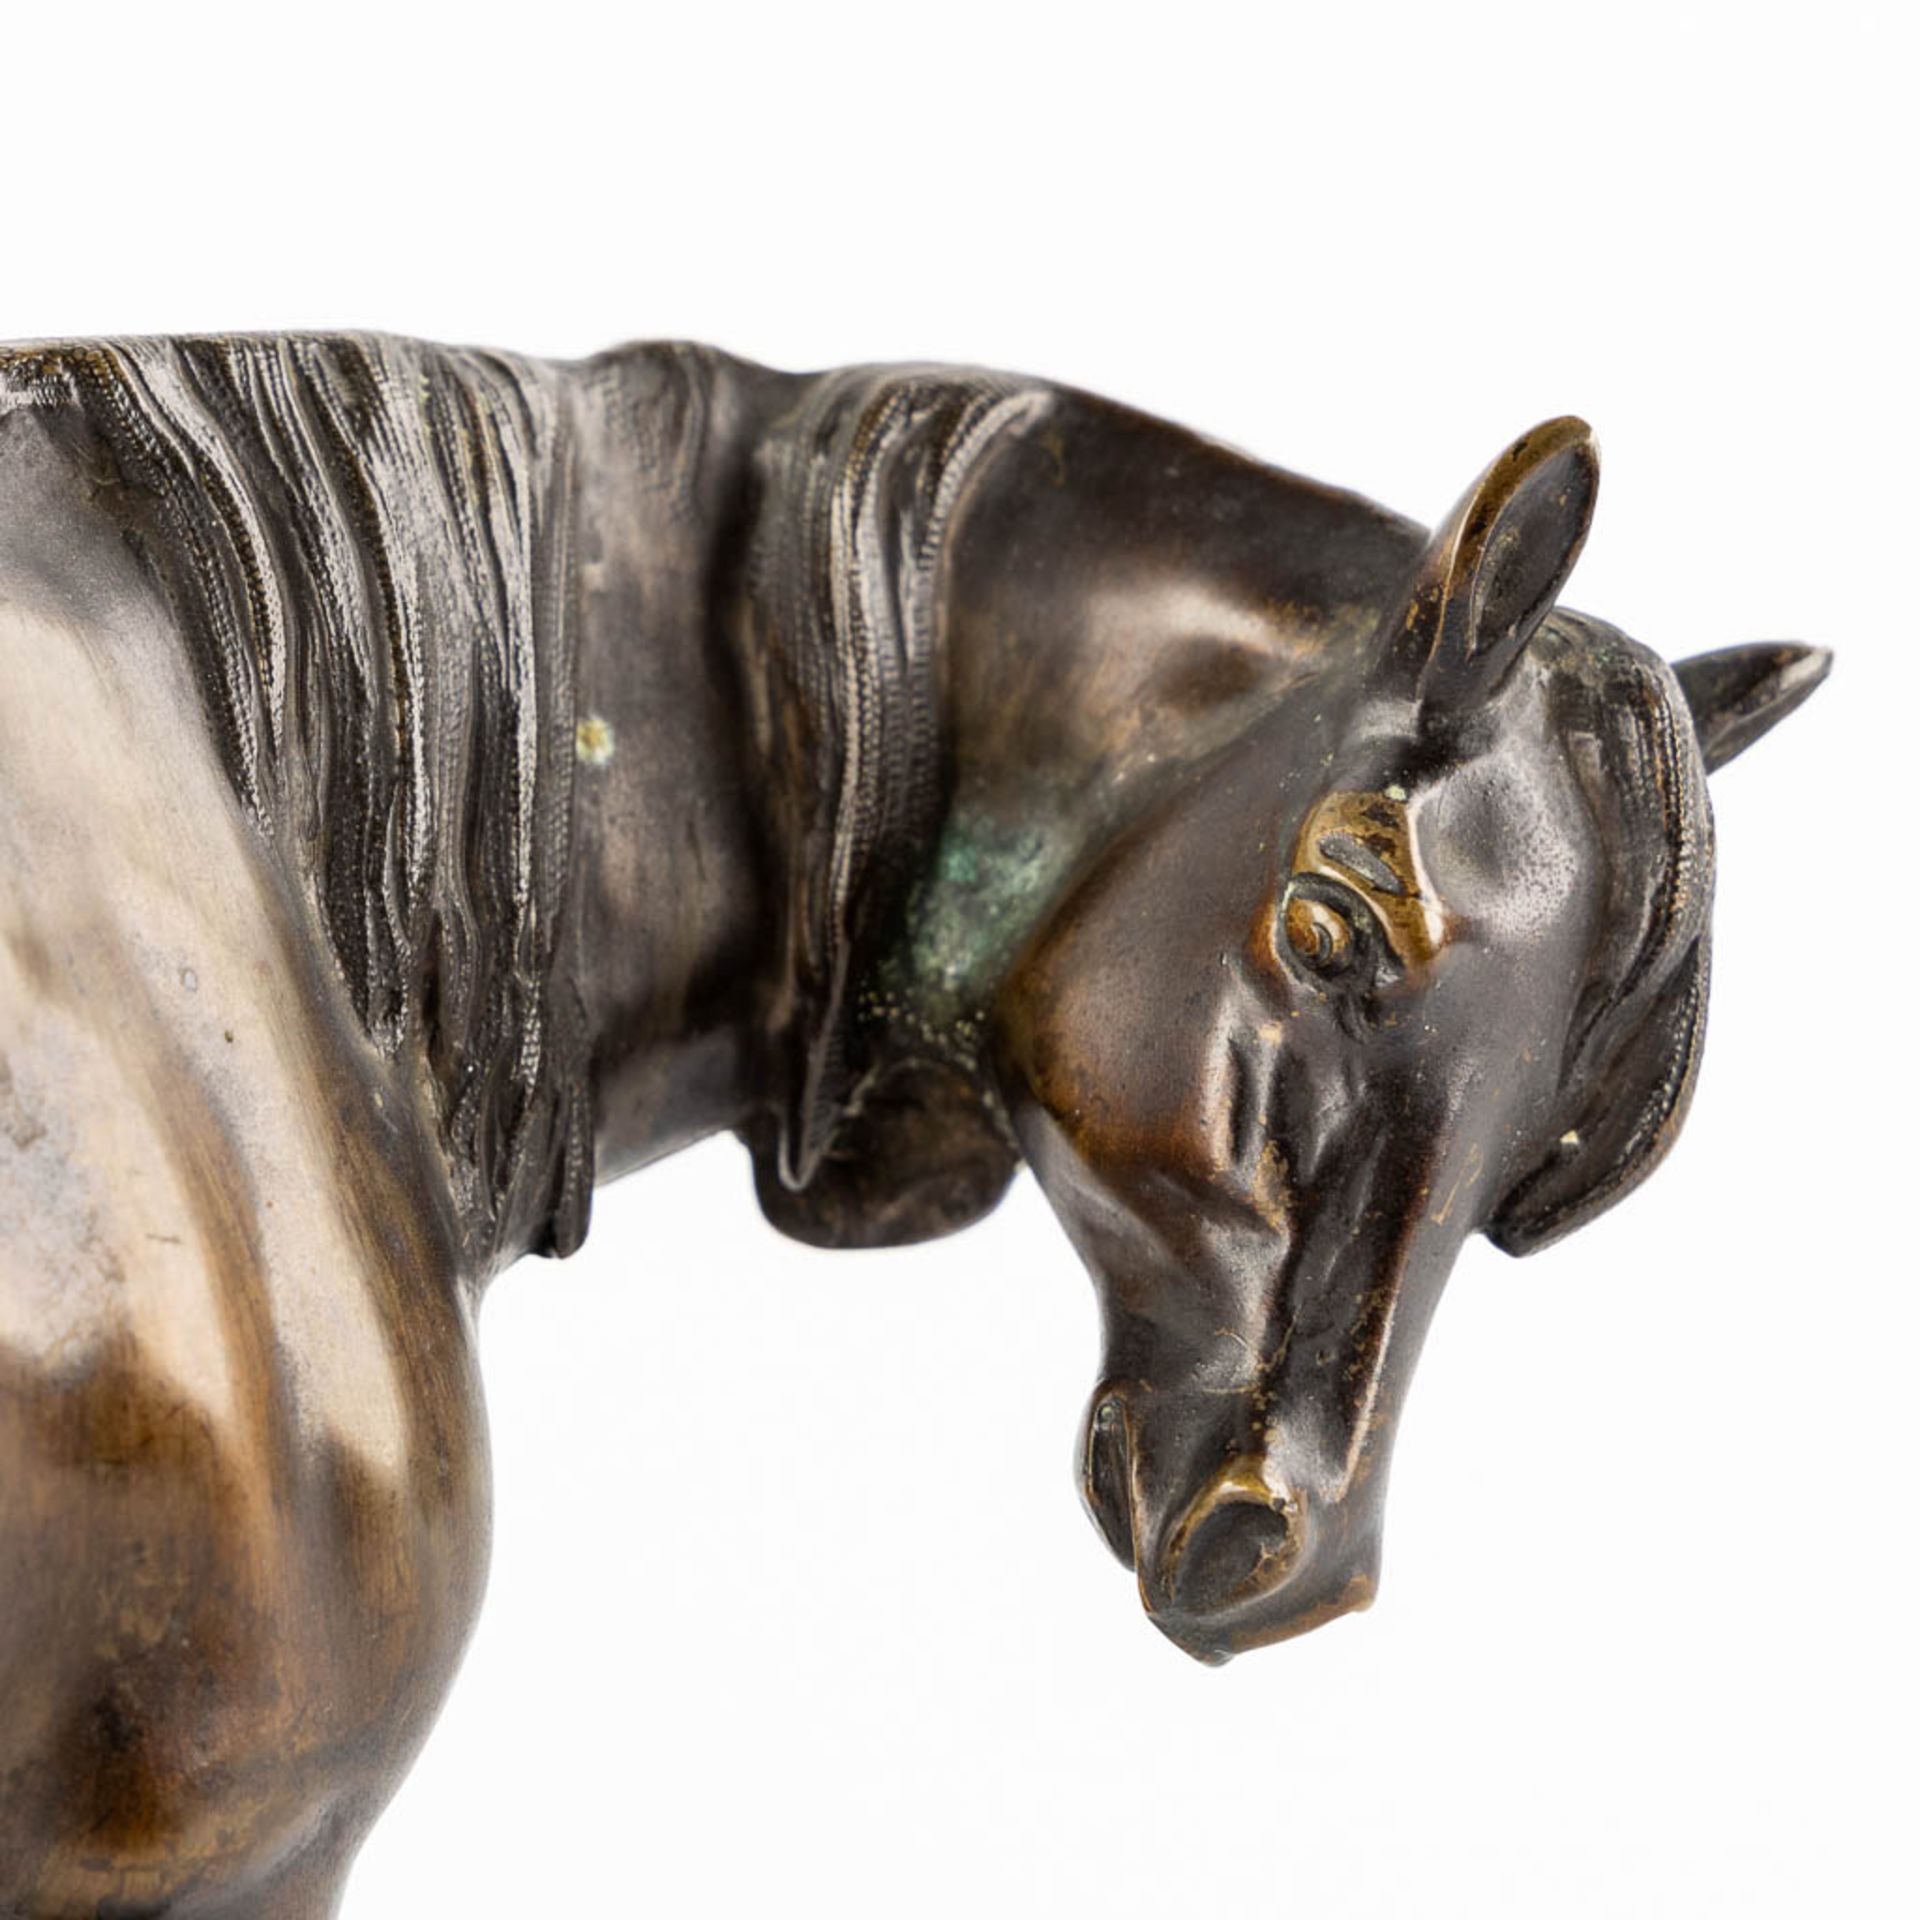 A patinated bronze figurine of a horse, black marble. (L:11 x W:27 x H:18 cm) - Image 7 of 9